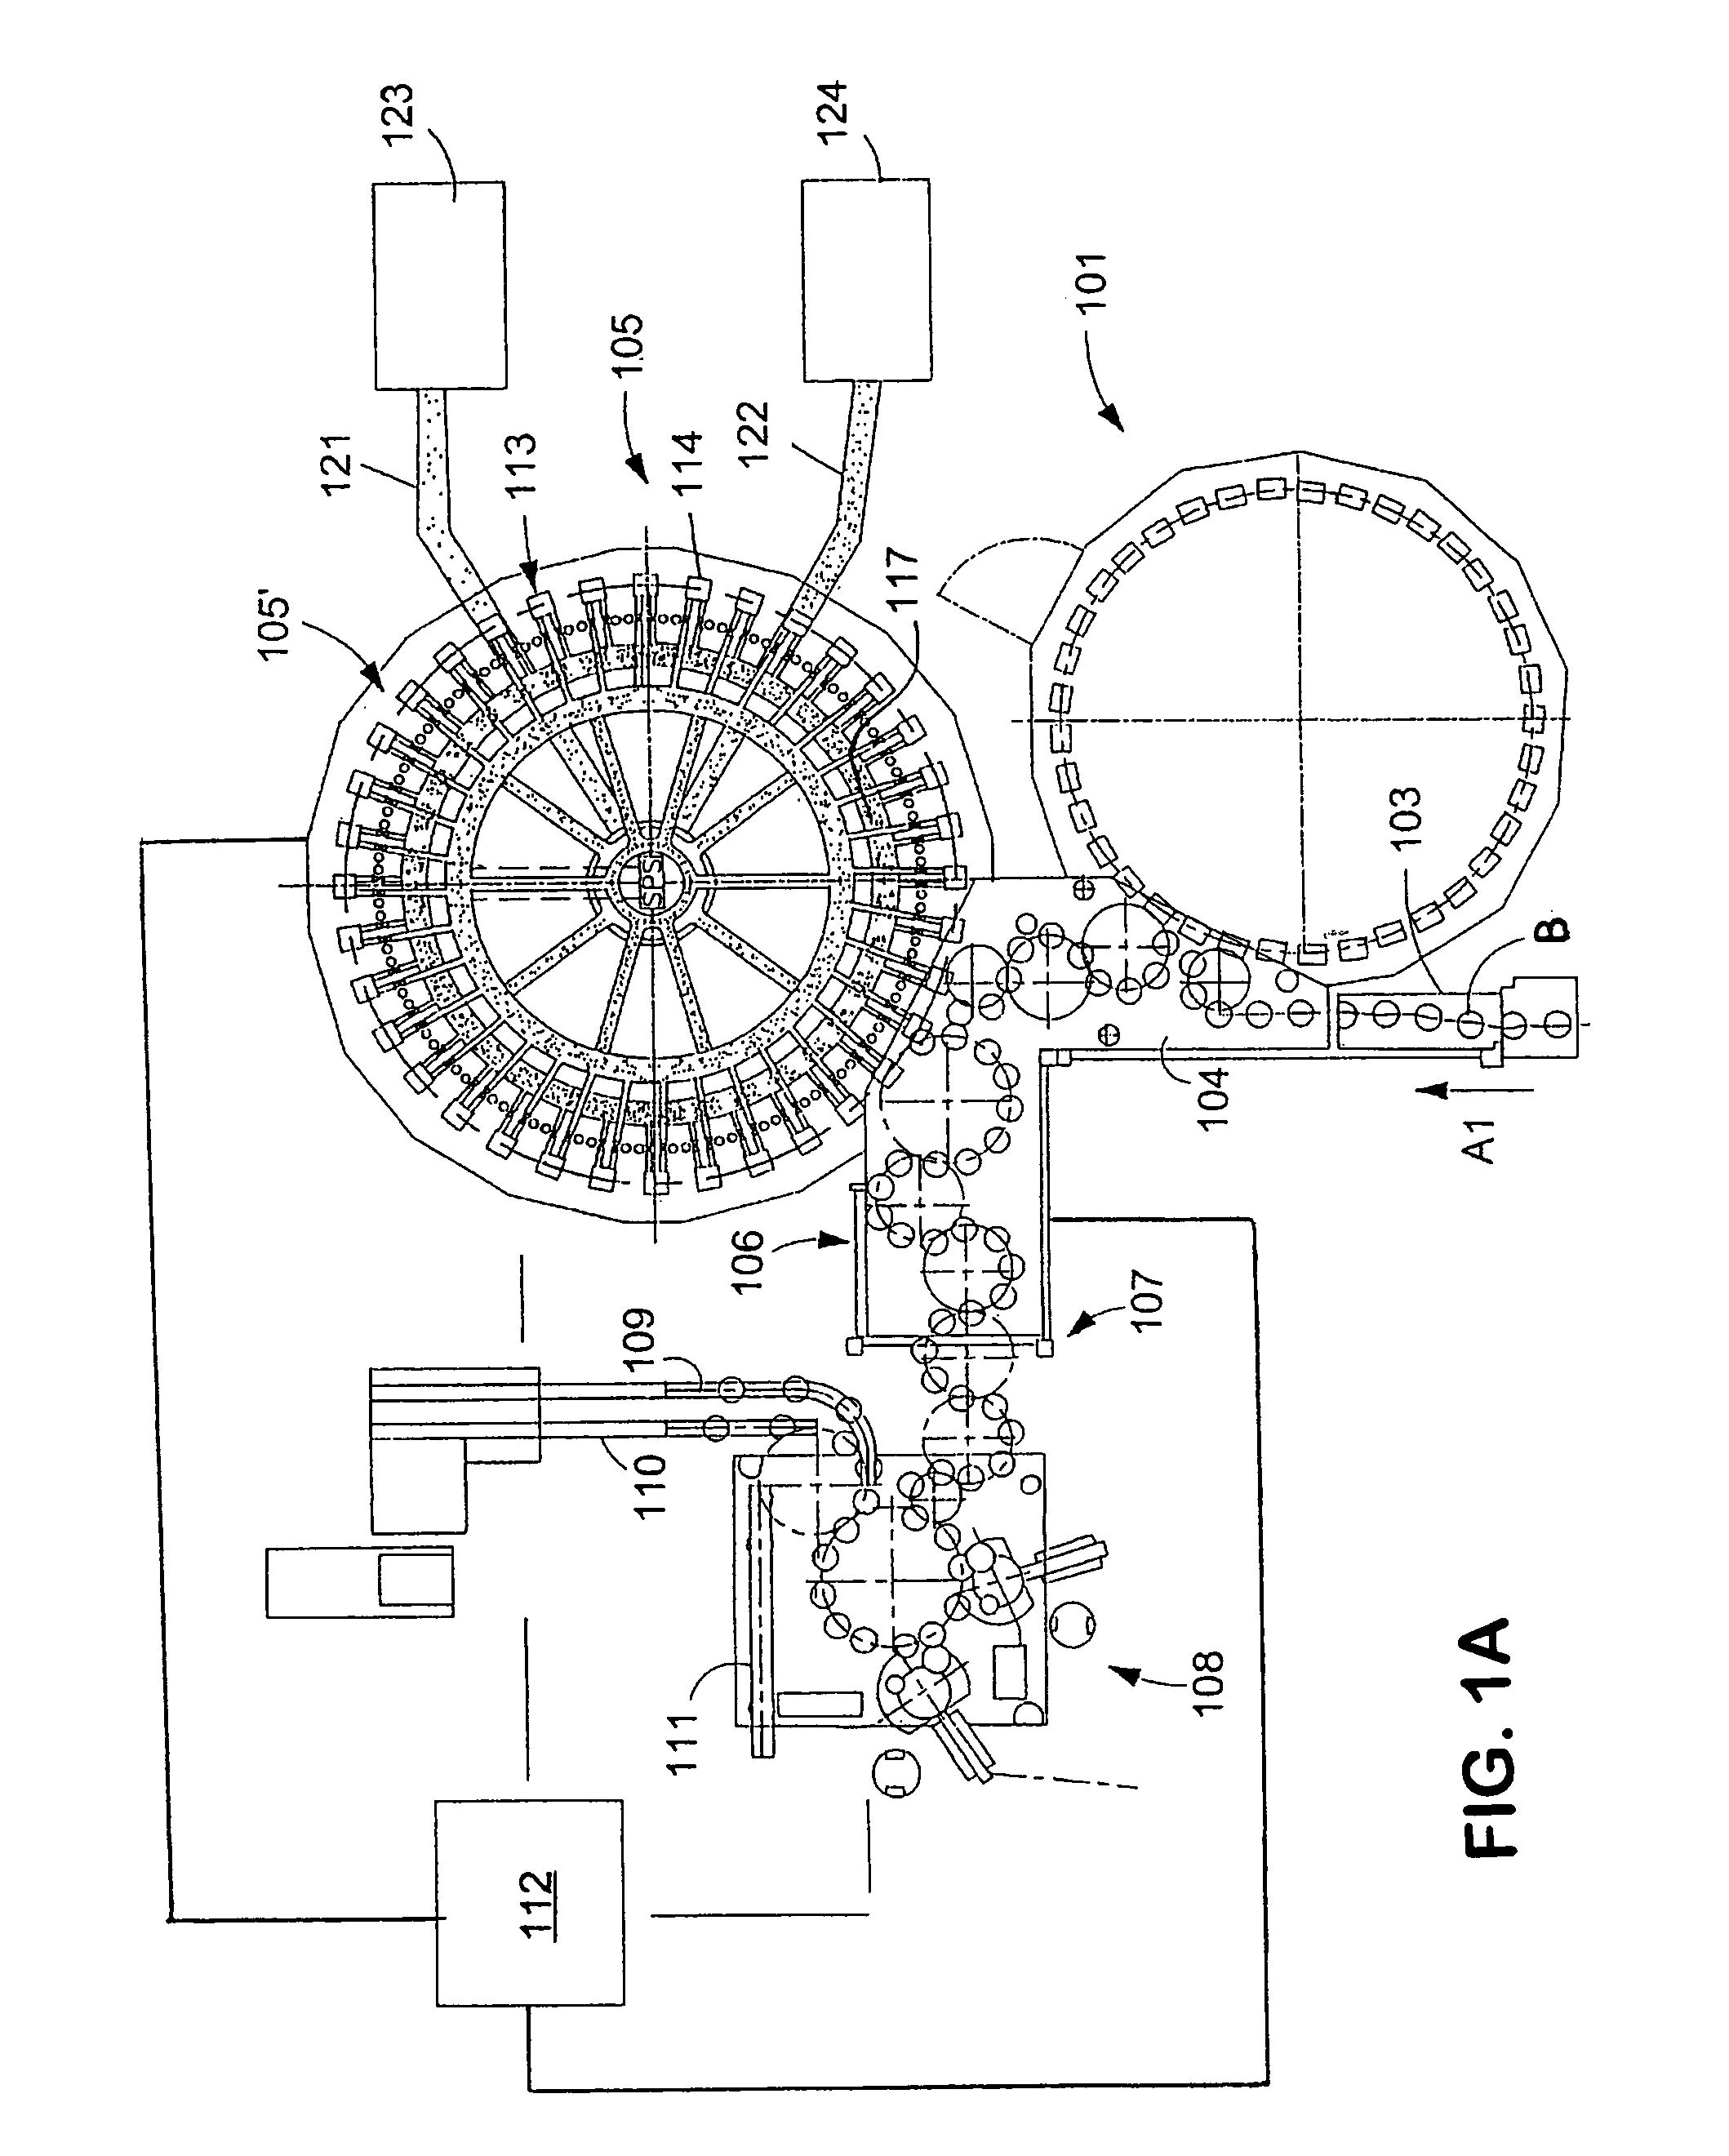 Container filling plant, such as a beverage bottling plant, for filling containers with a liquid beverage and for closing filled containers